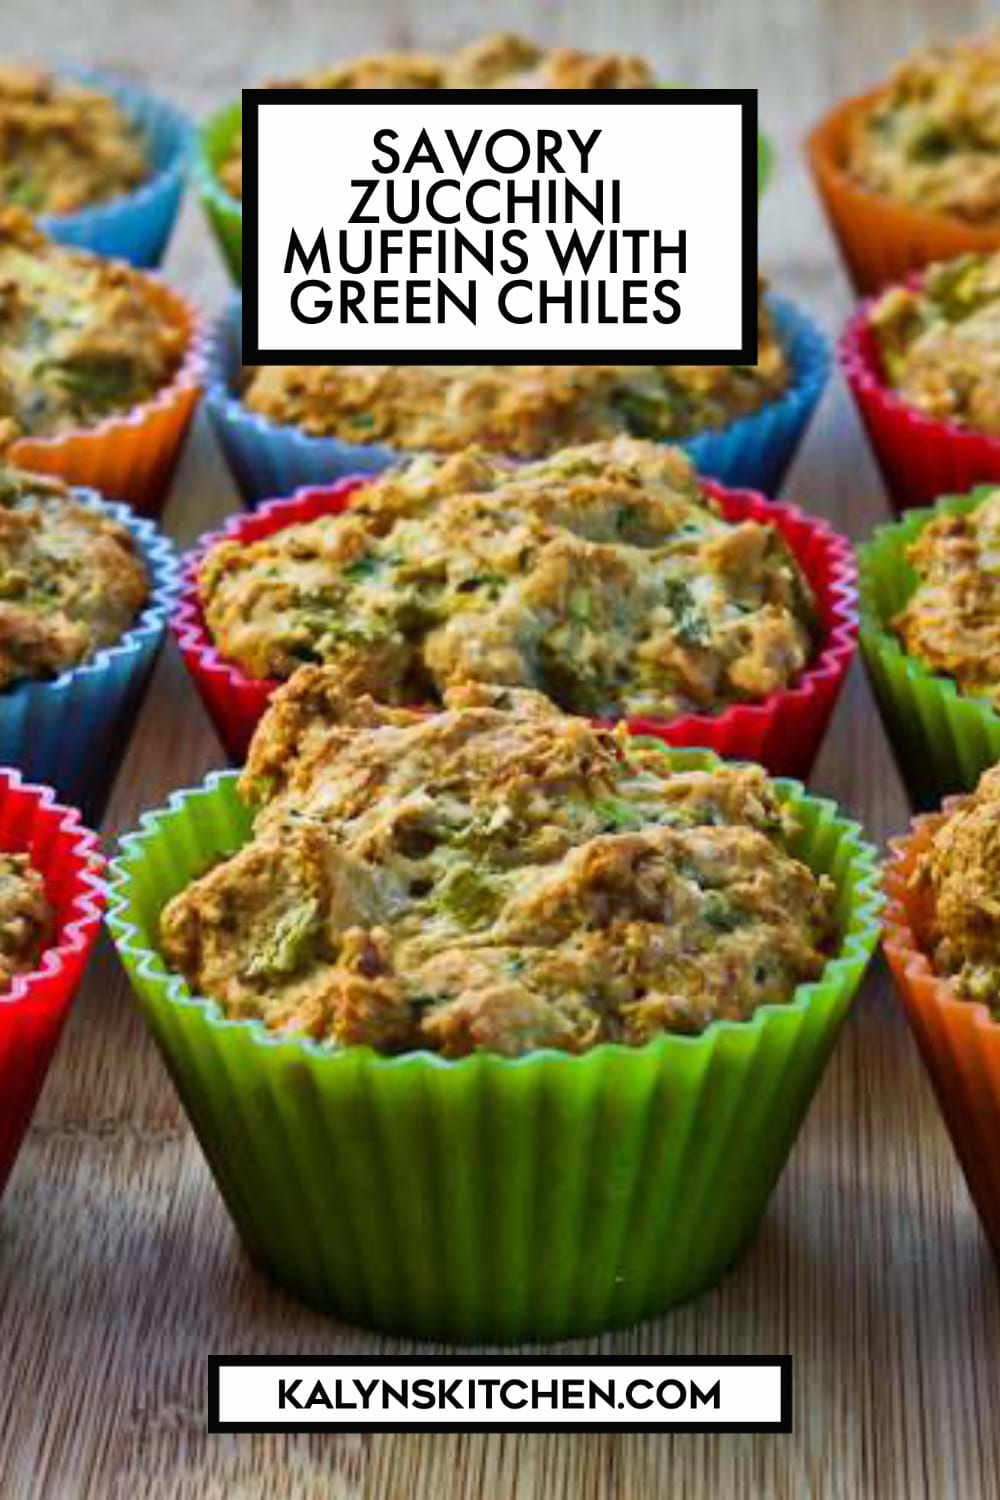 Pinterest image of Savory Zucchini Muffins with Green Chiles